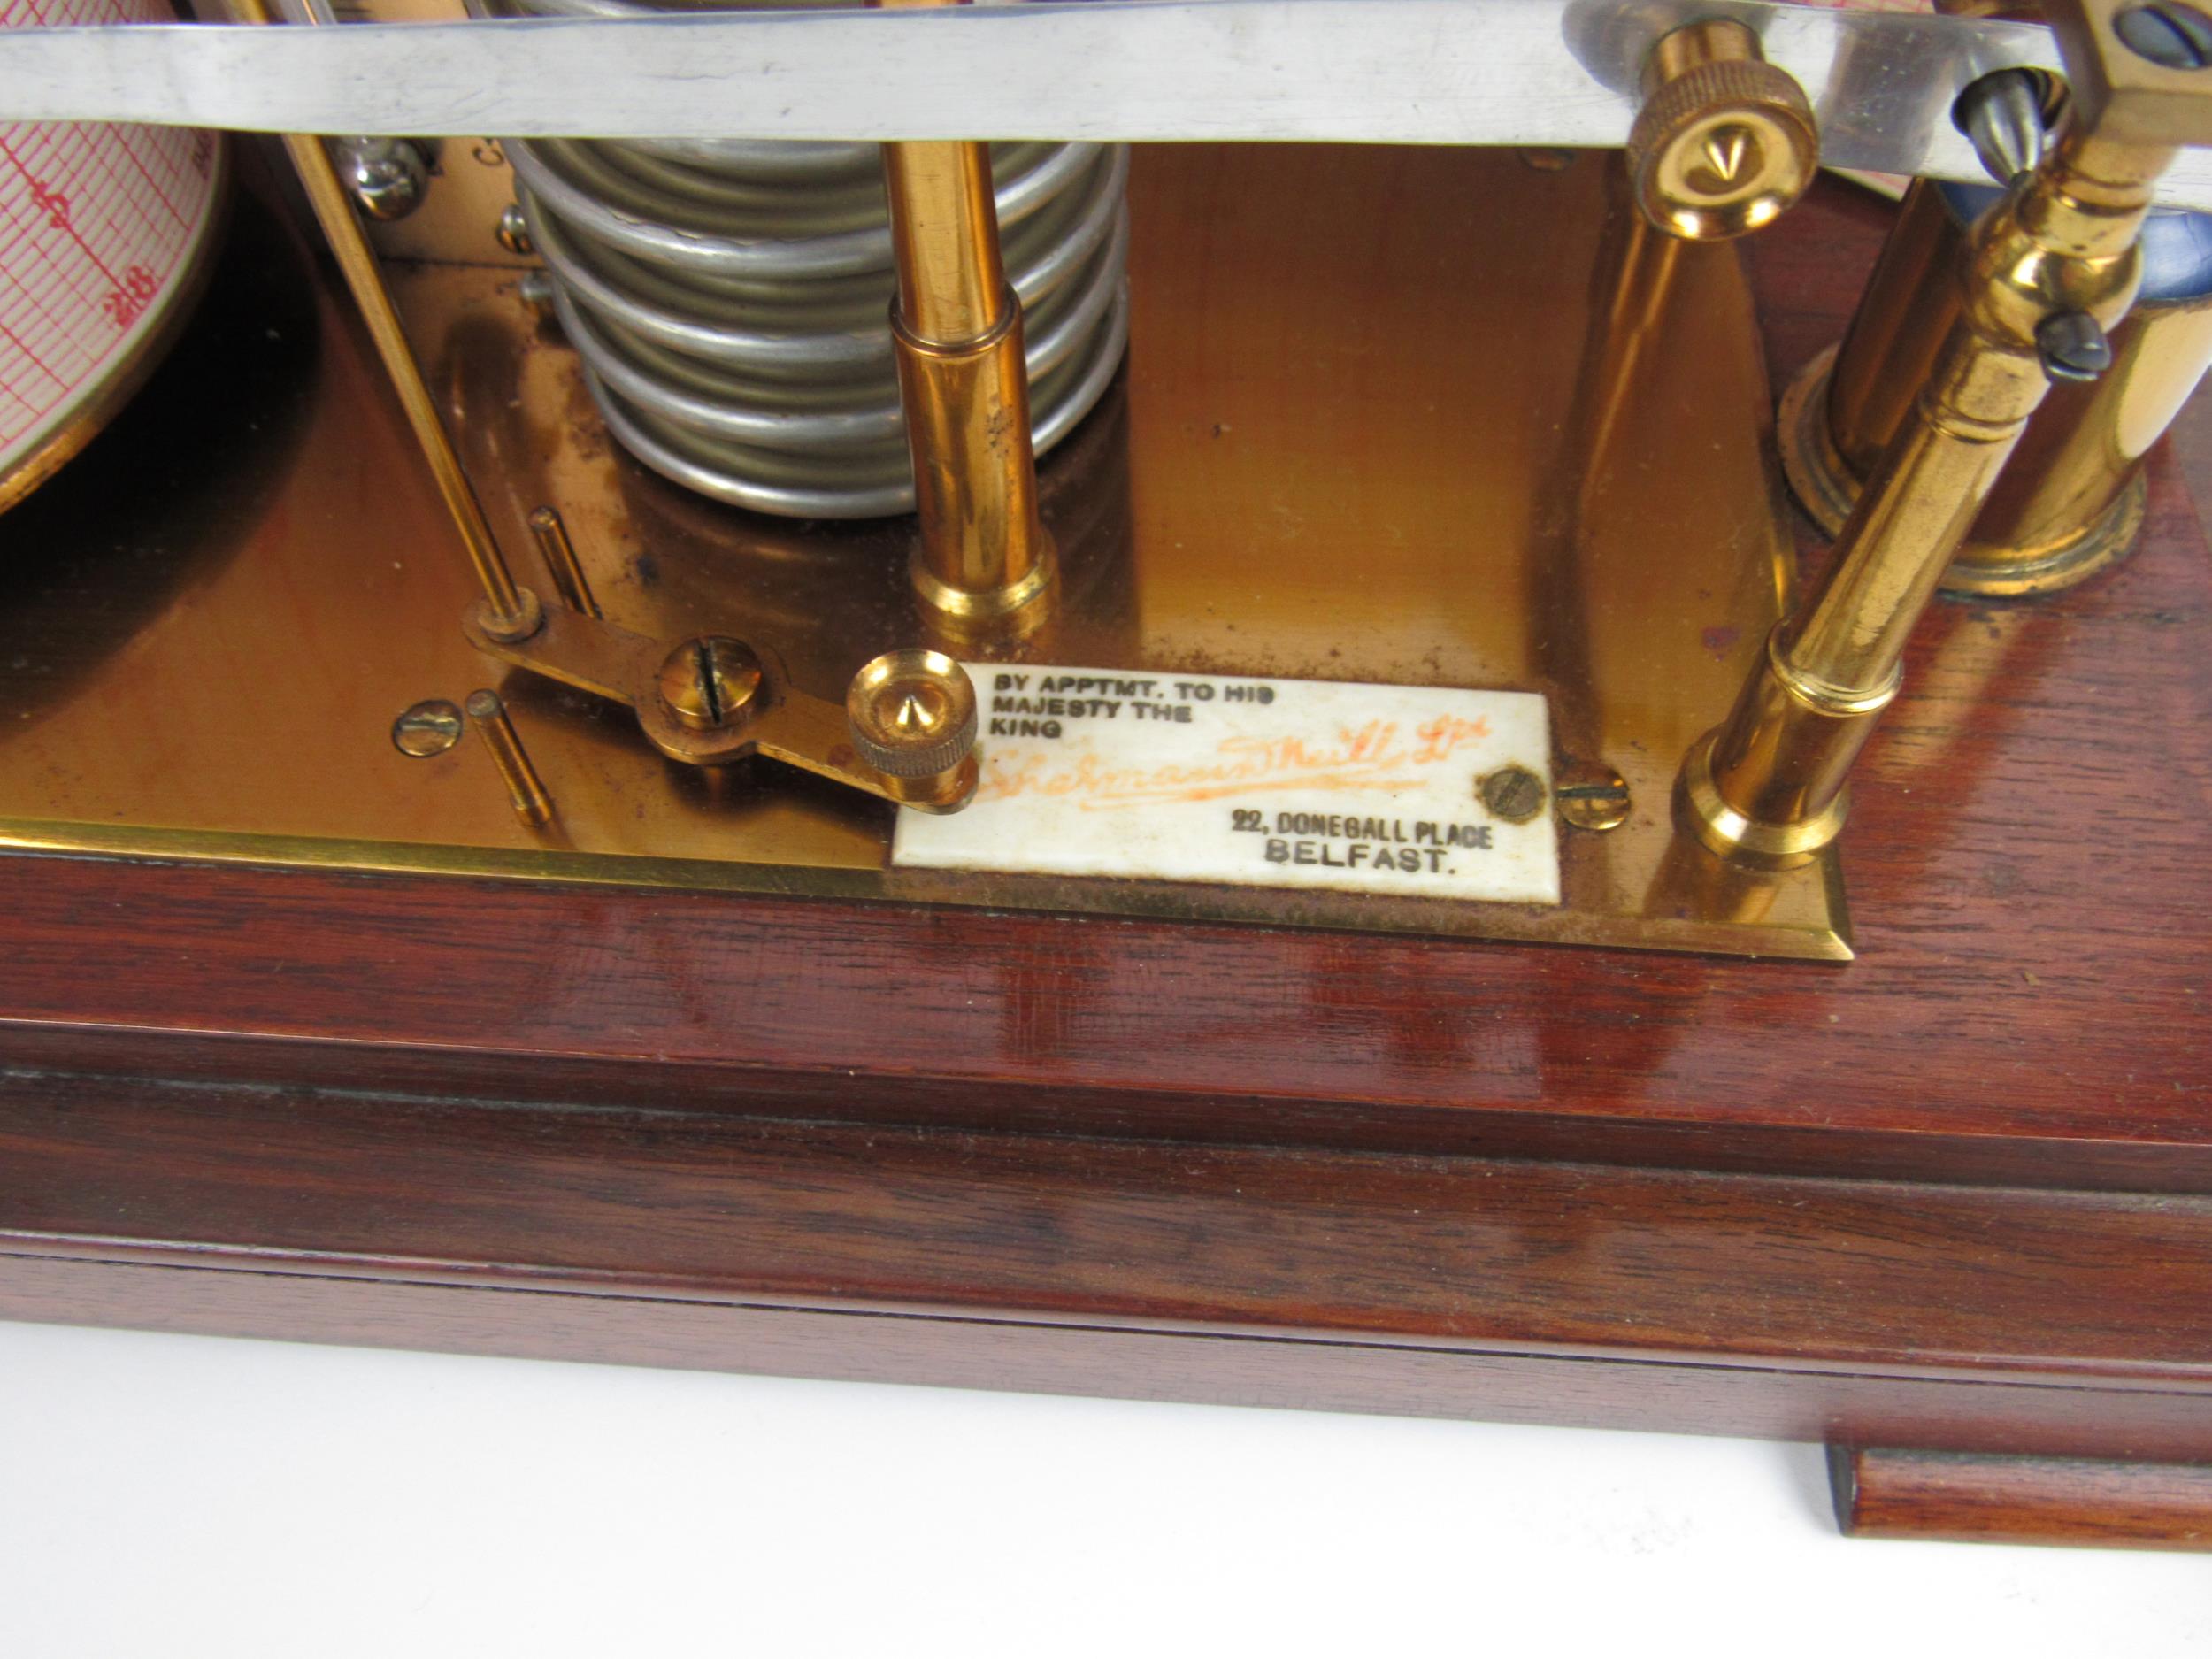 A very good 20th Century mahogany cased Barograph, by Shelman Mc Neill, 22 Donegal Place, Belfast, - Image 3 of 5